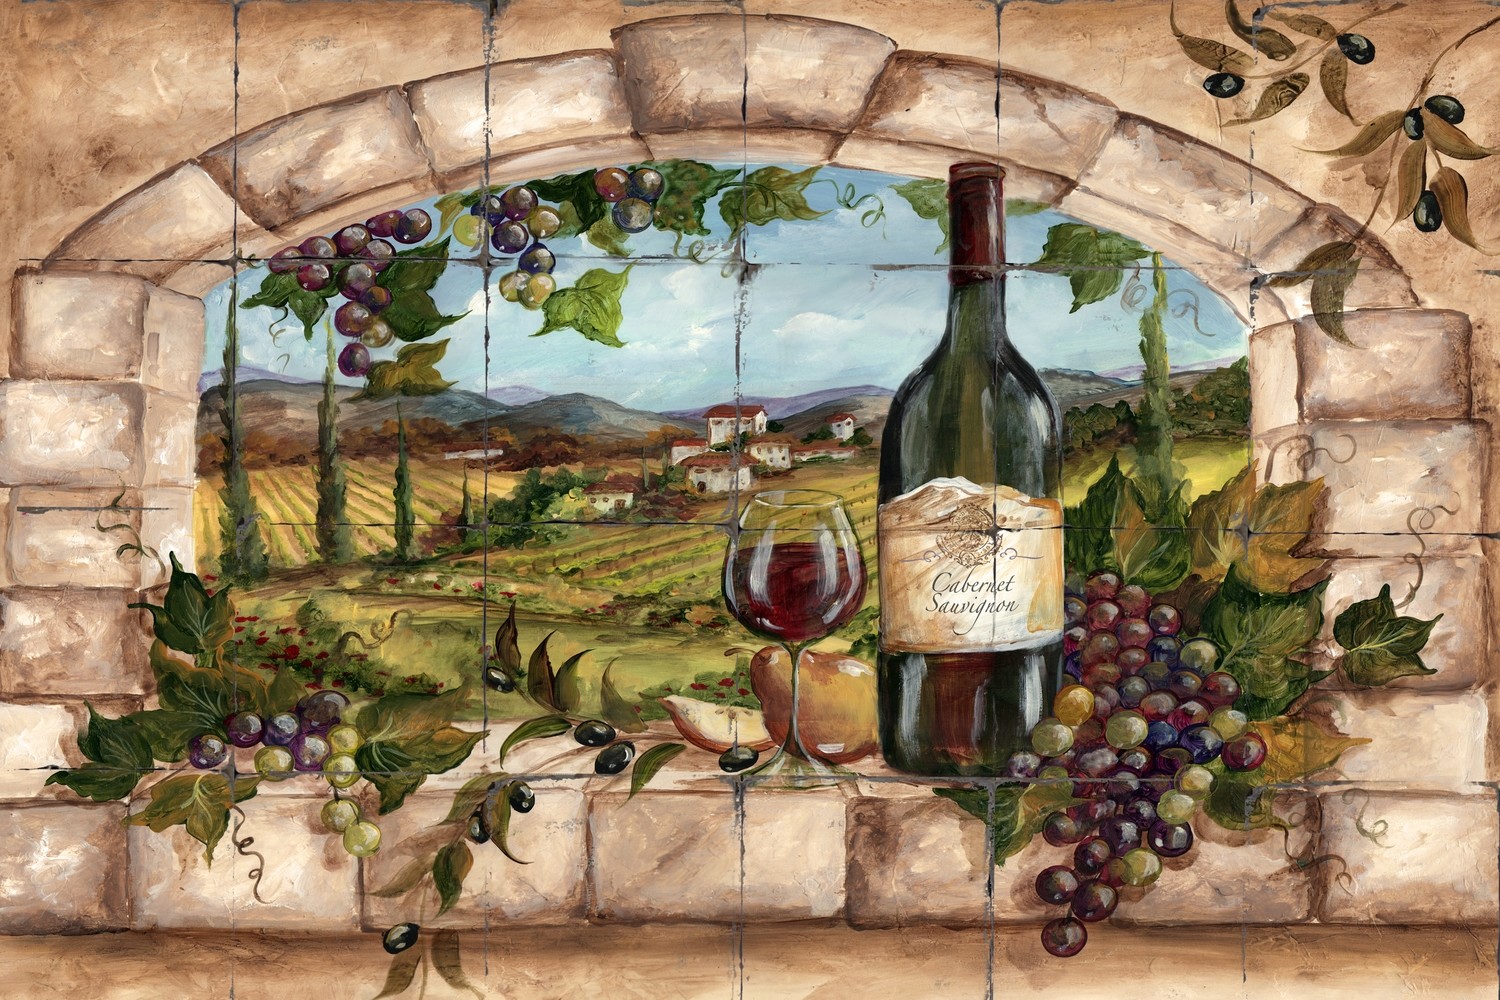 Tuscan Grape Archway Hand-Painted Tile Mural